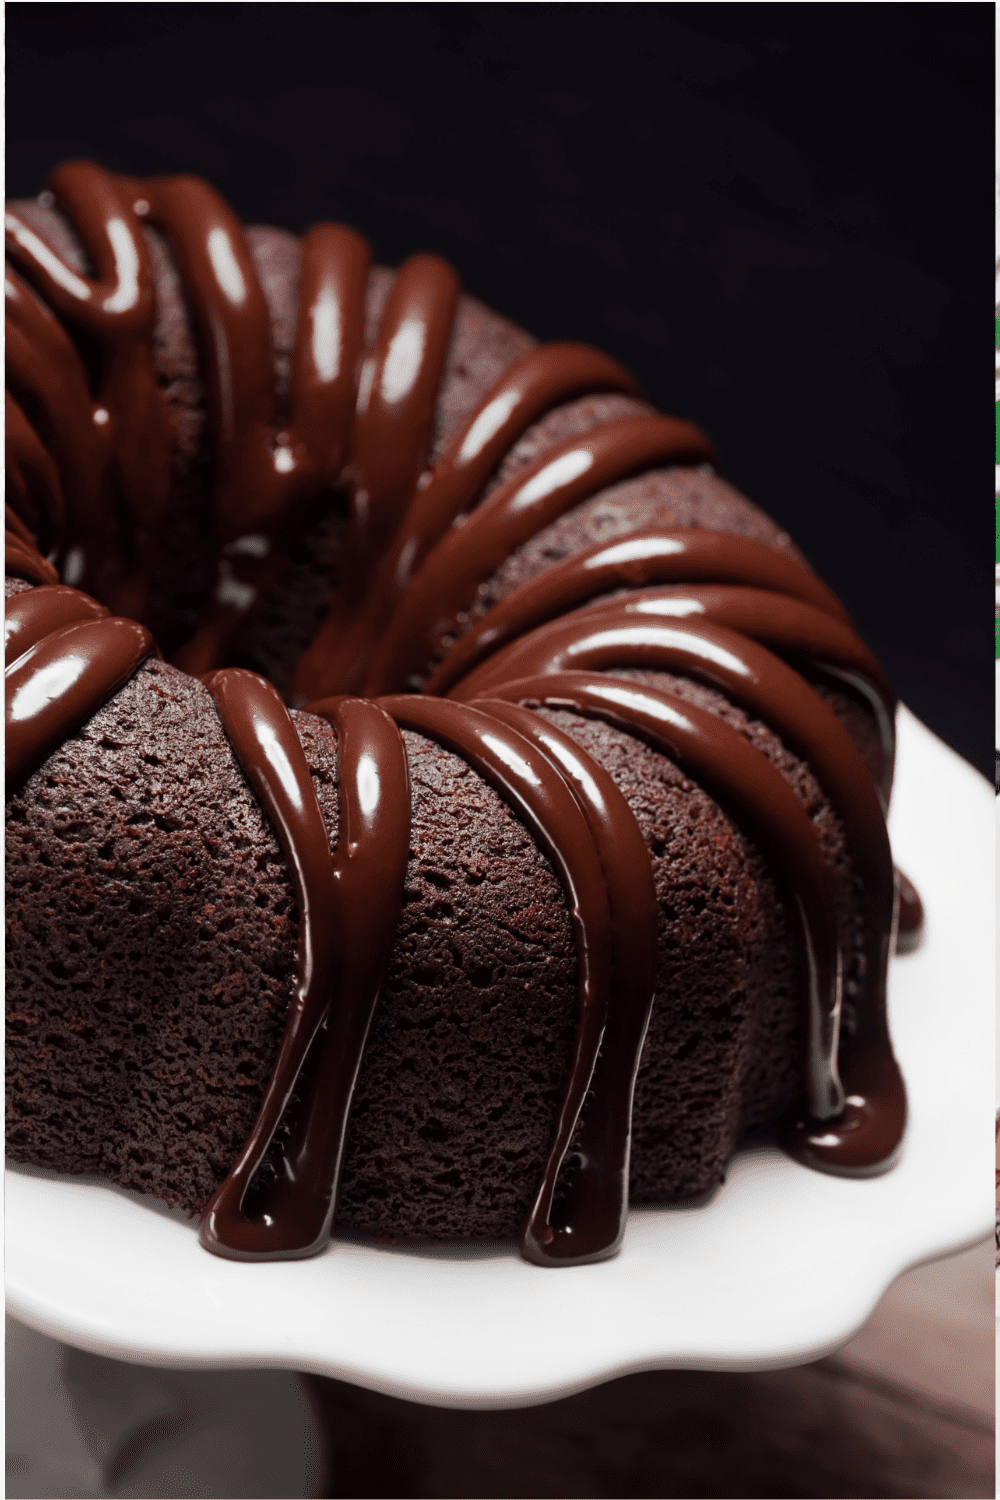 Pouring chocolate ganache over the cool bundt cake.